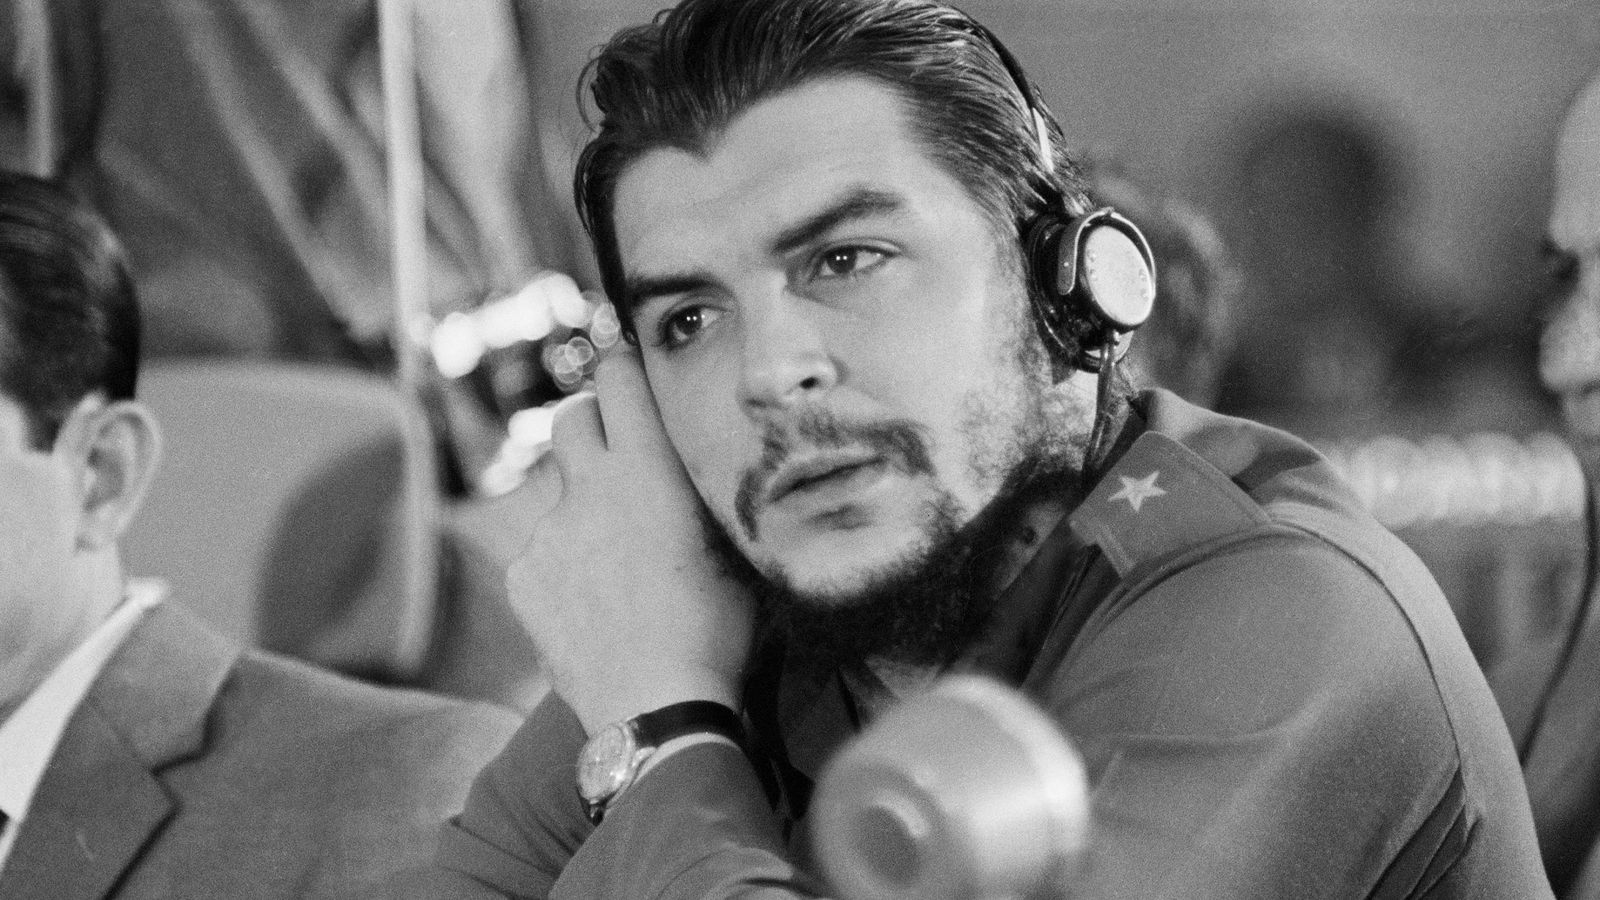 THE DEATH OF CHE GUEVARA: – Soldier of Fortune Magazine